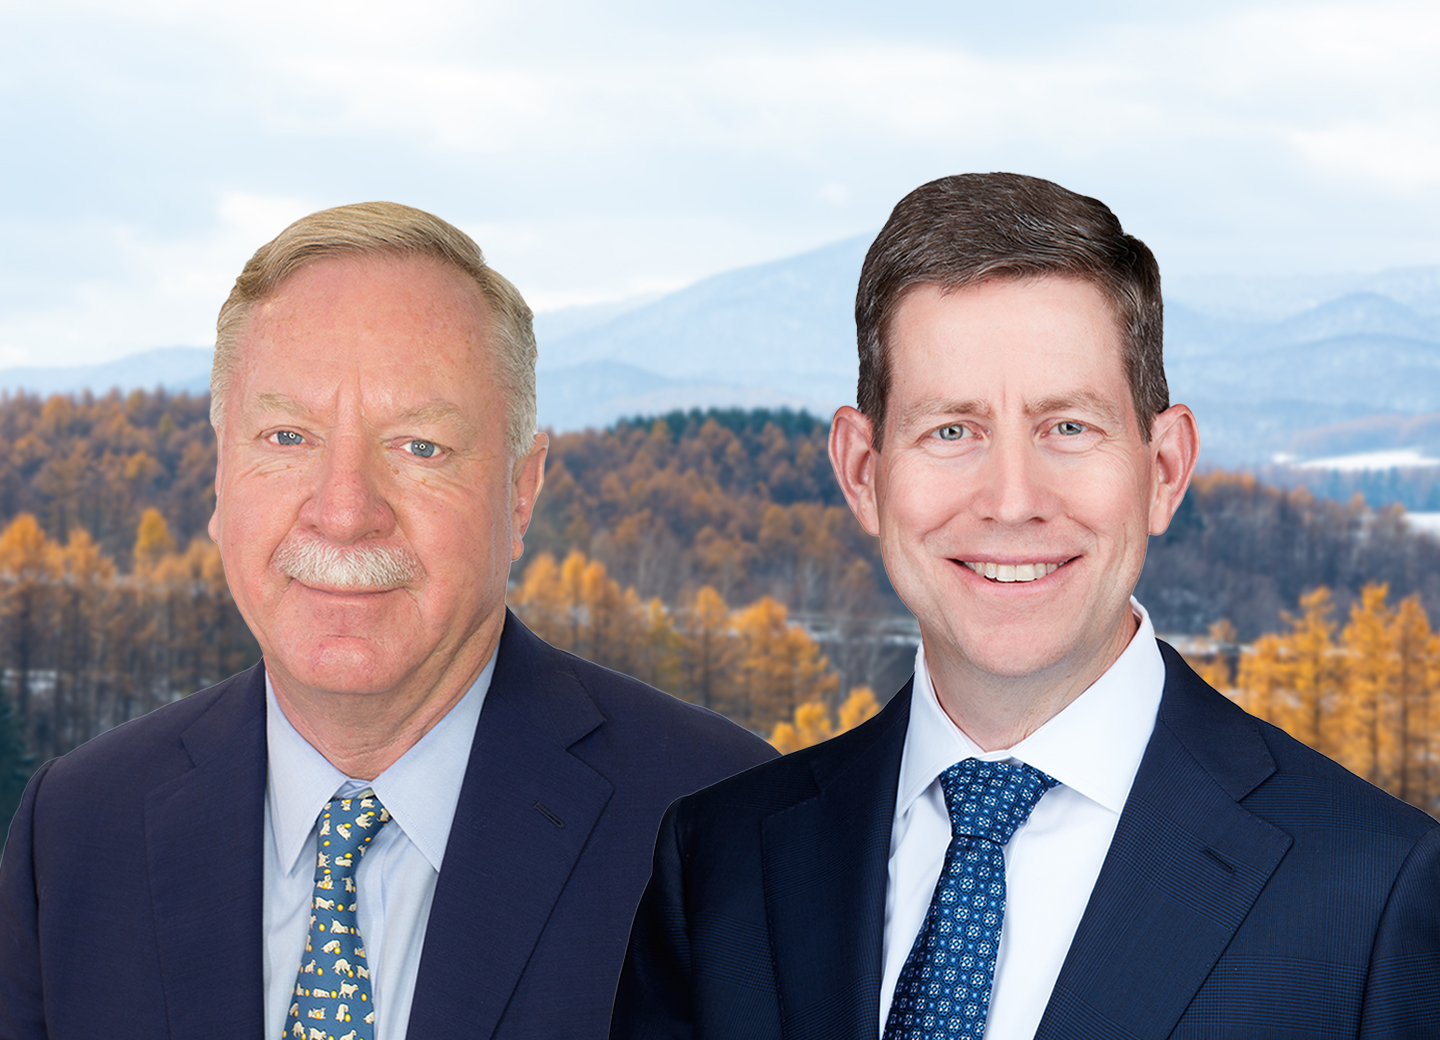 Domtar CEO Transition: John Williams (retiring) and Steve Henry (successor) pictured against a mountain backdrop.